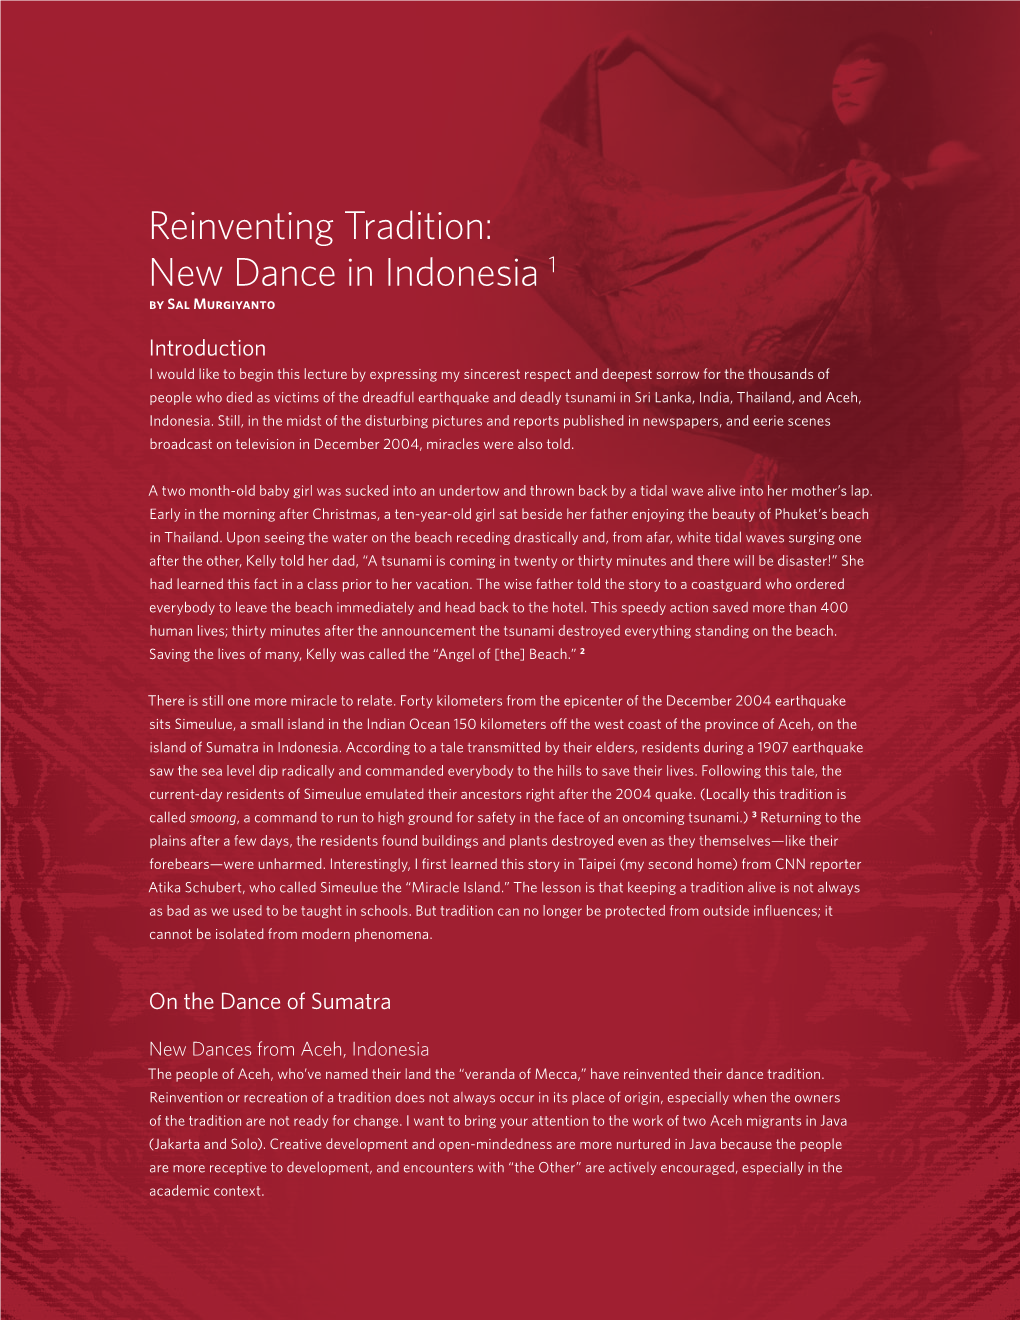 Reinventing Tradition: New Dance in Indonesia 1 by Sal Murgiyanto